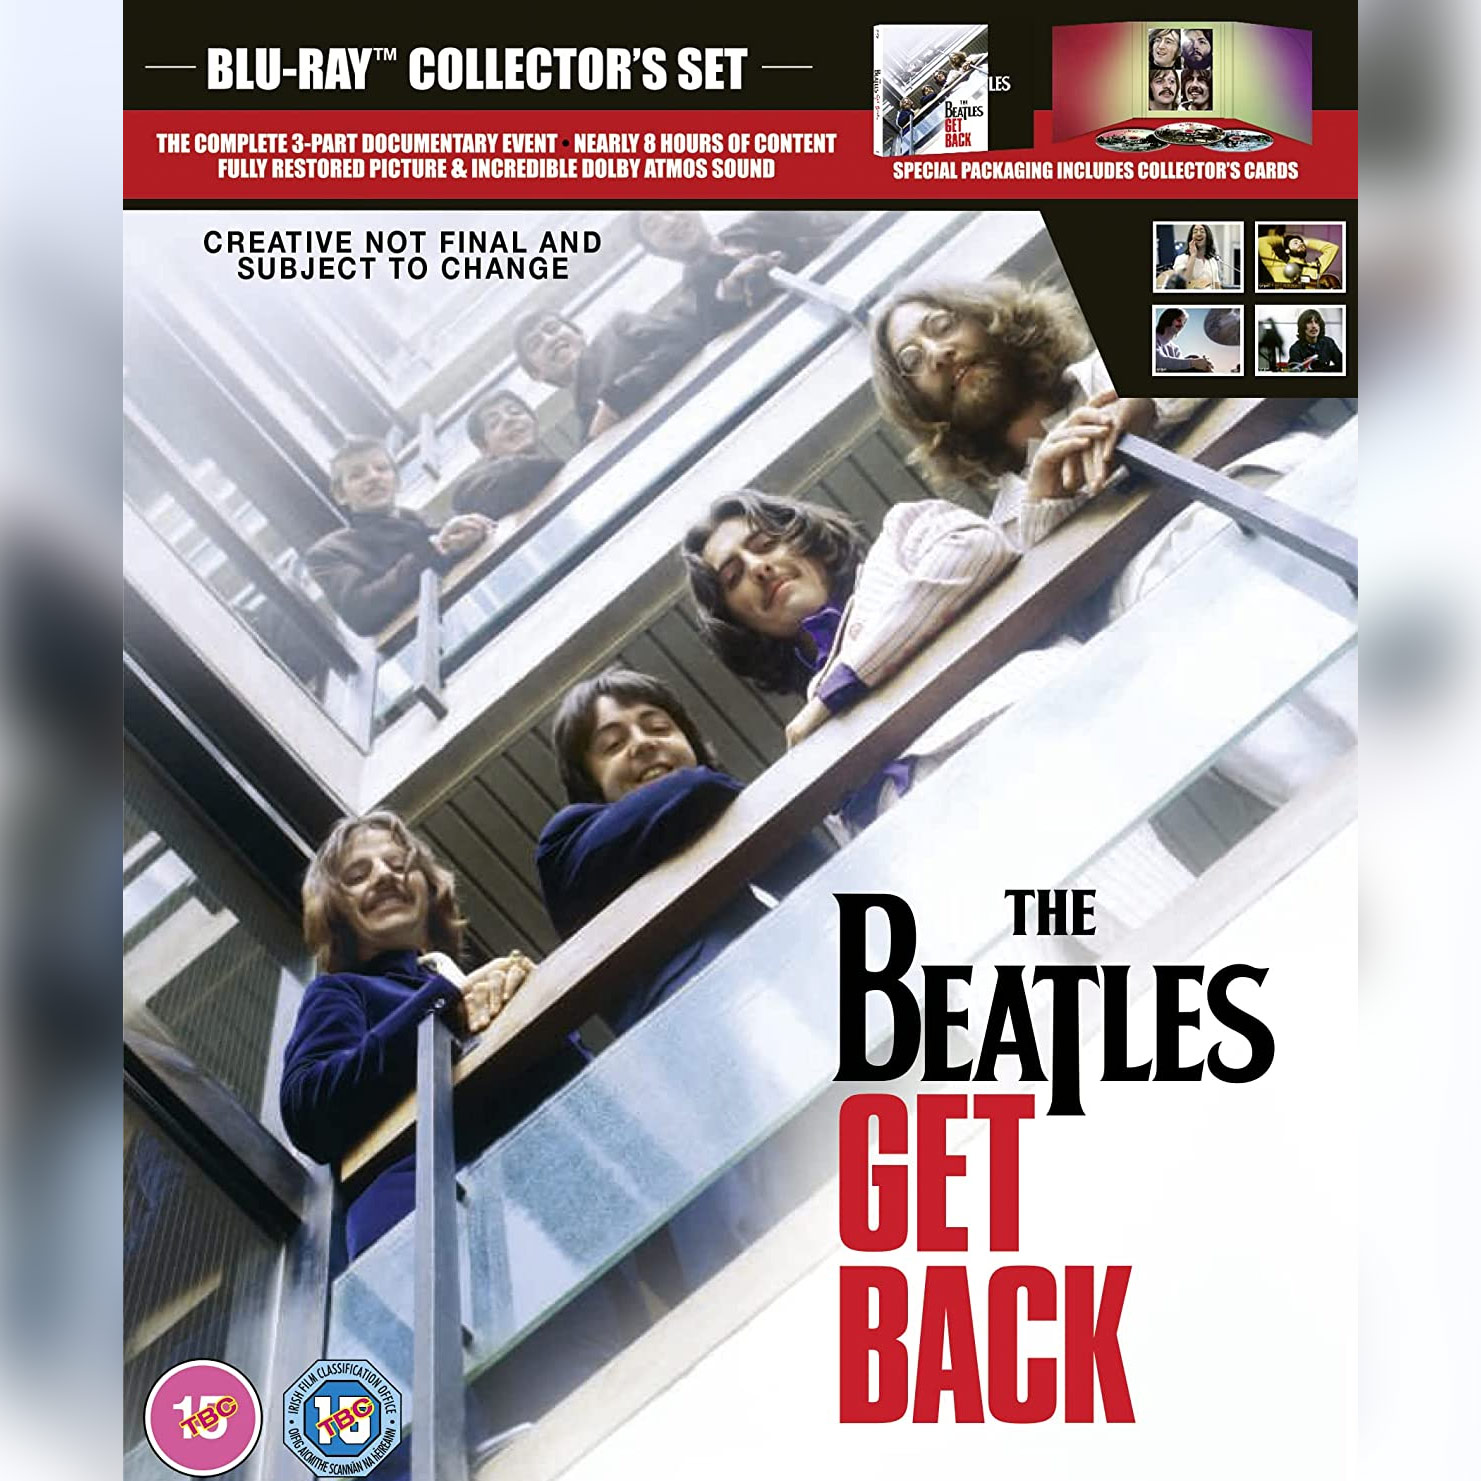 The Beatles: Get Back to be issued on blu-ray  DVD – SuperDeluxeEdition